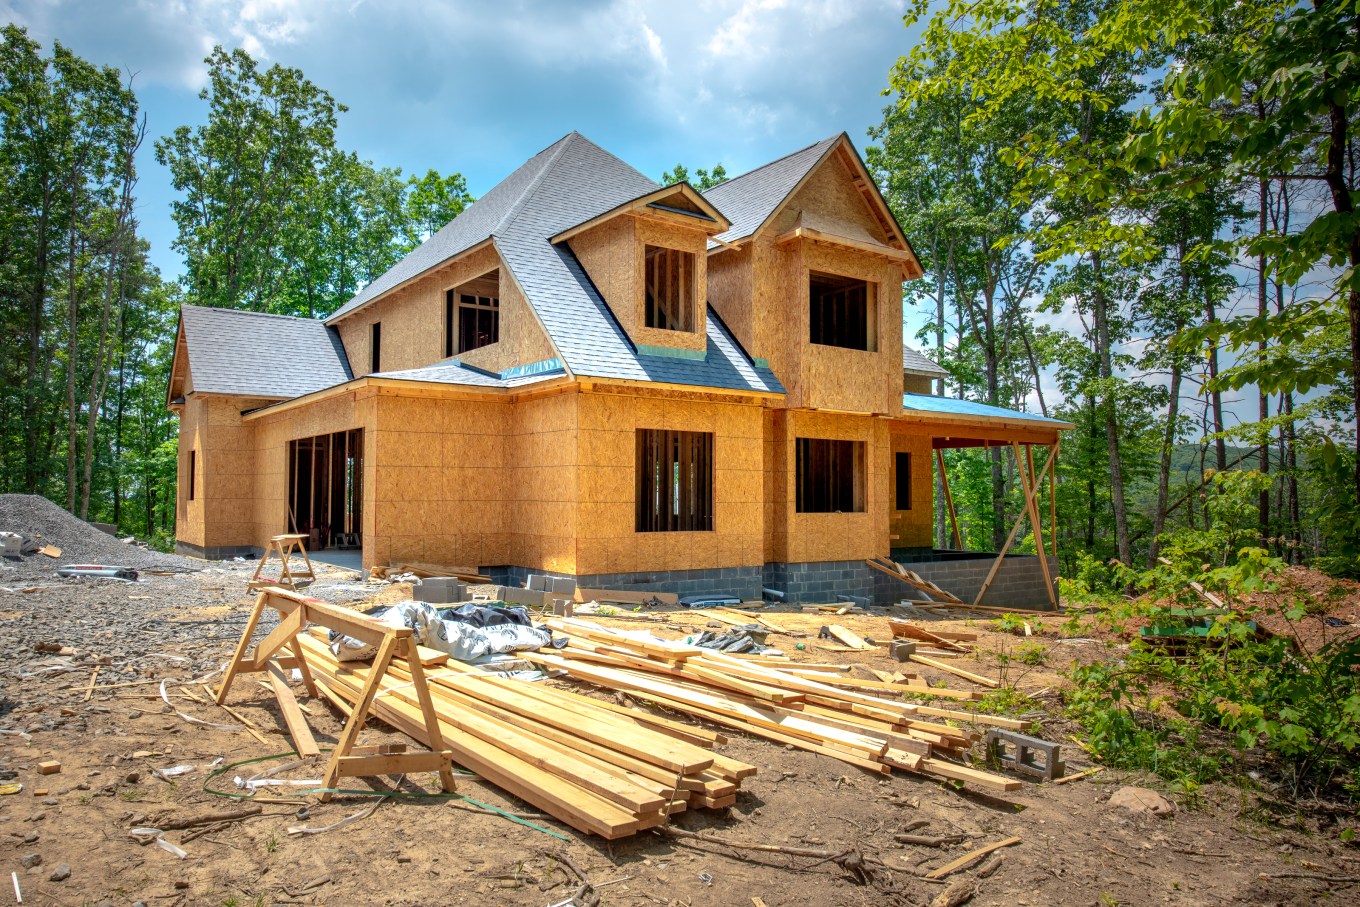 A new home being constructed around trees and with uneven terrain offers many considerations.